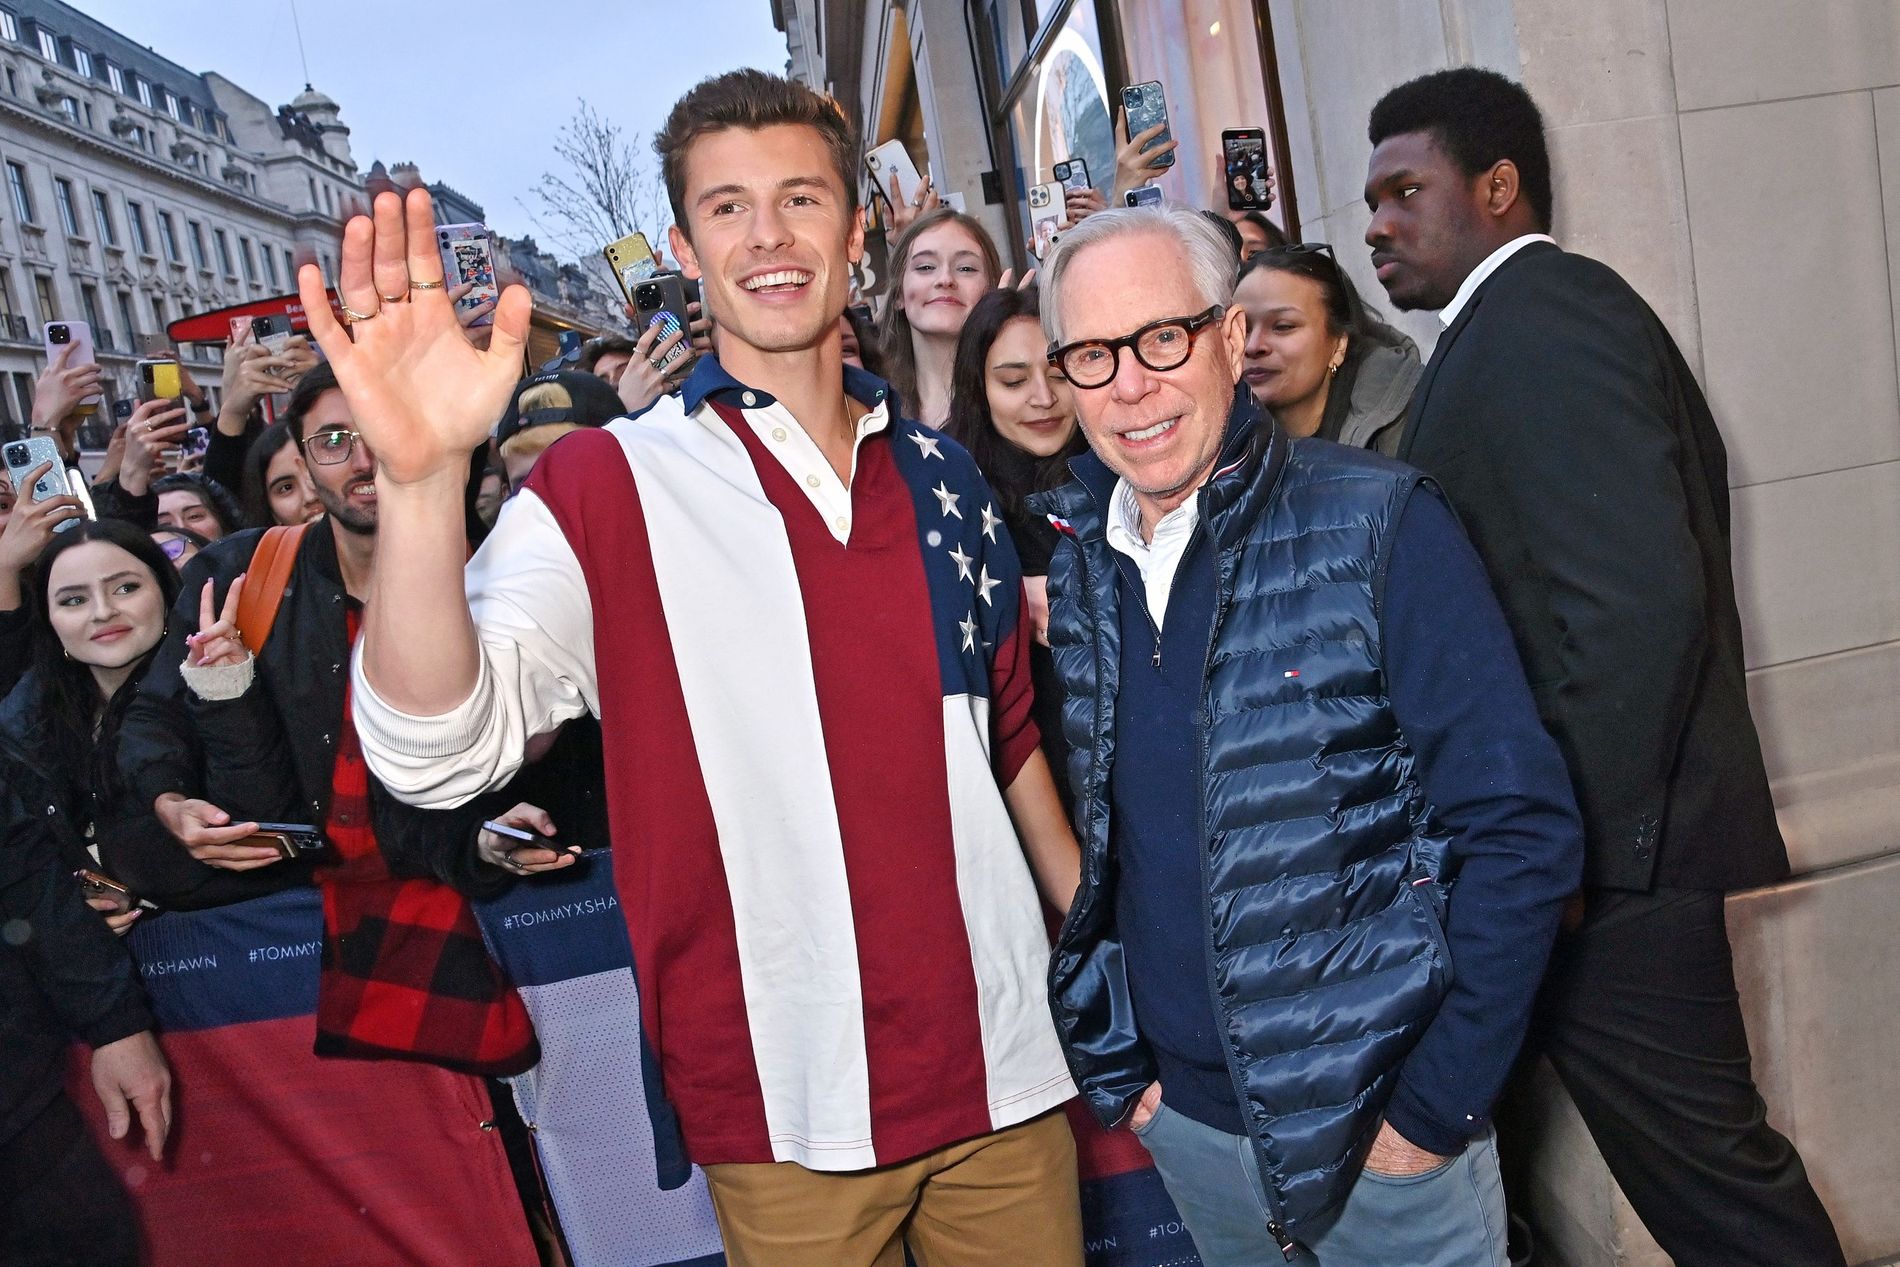 A partnership with purpose: Shawn Mendes and Tommy Hilfiger on